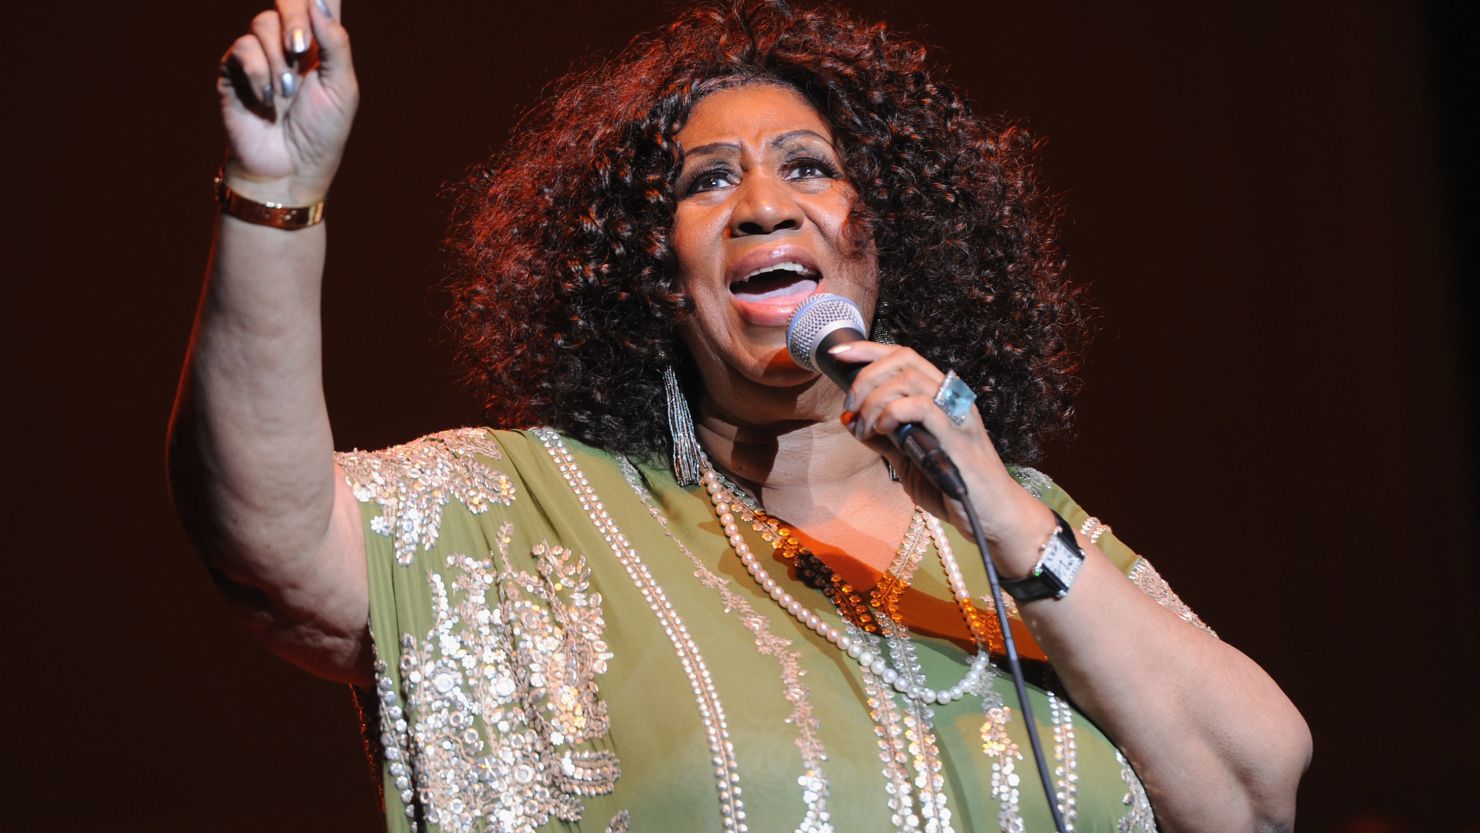 The Queen of Soul, Aretha Franklin, performs at the Fox Theatre on March 5 in Atlanta. She says folks young and old know her.